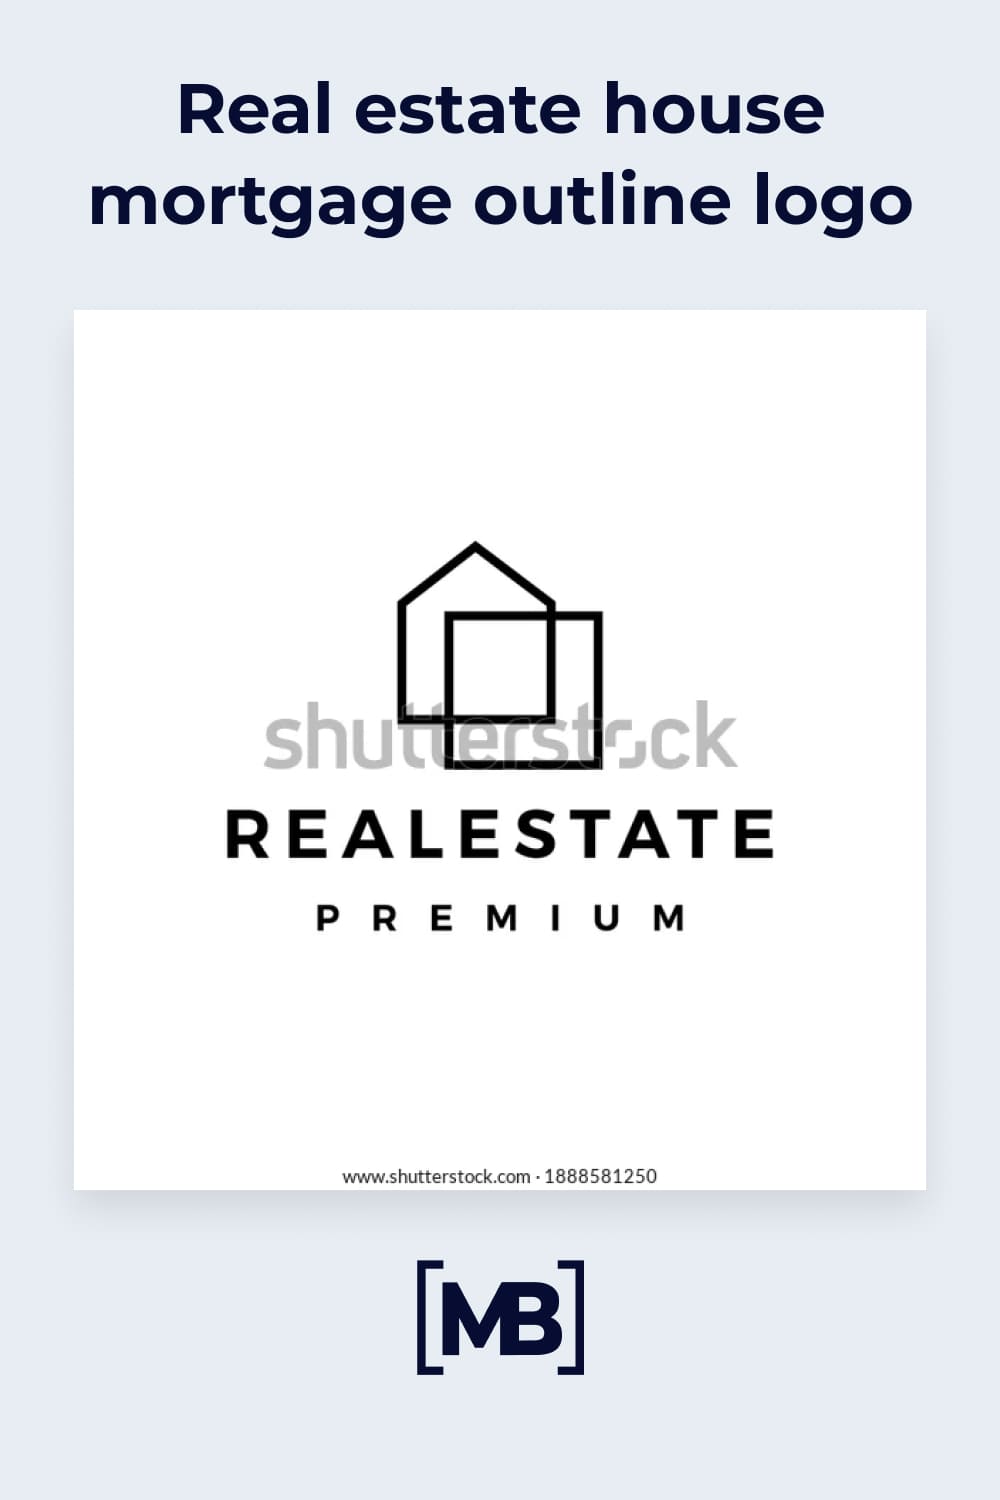 Real estate house mortgage outline logo vector icon illustration.